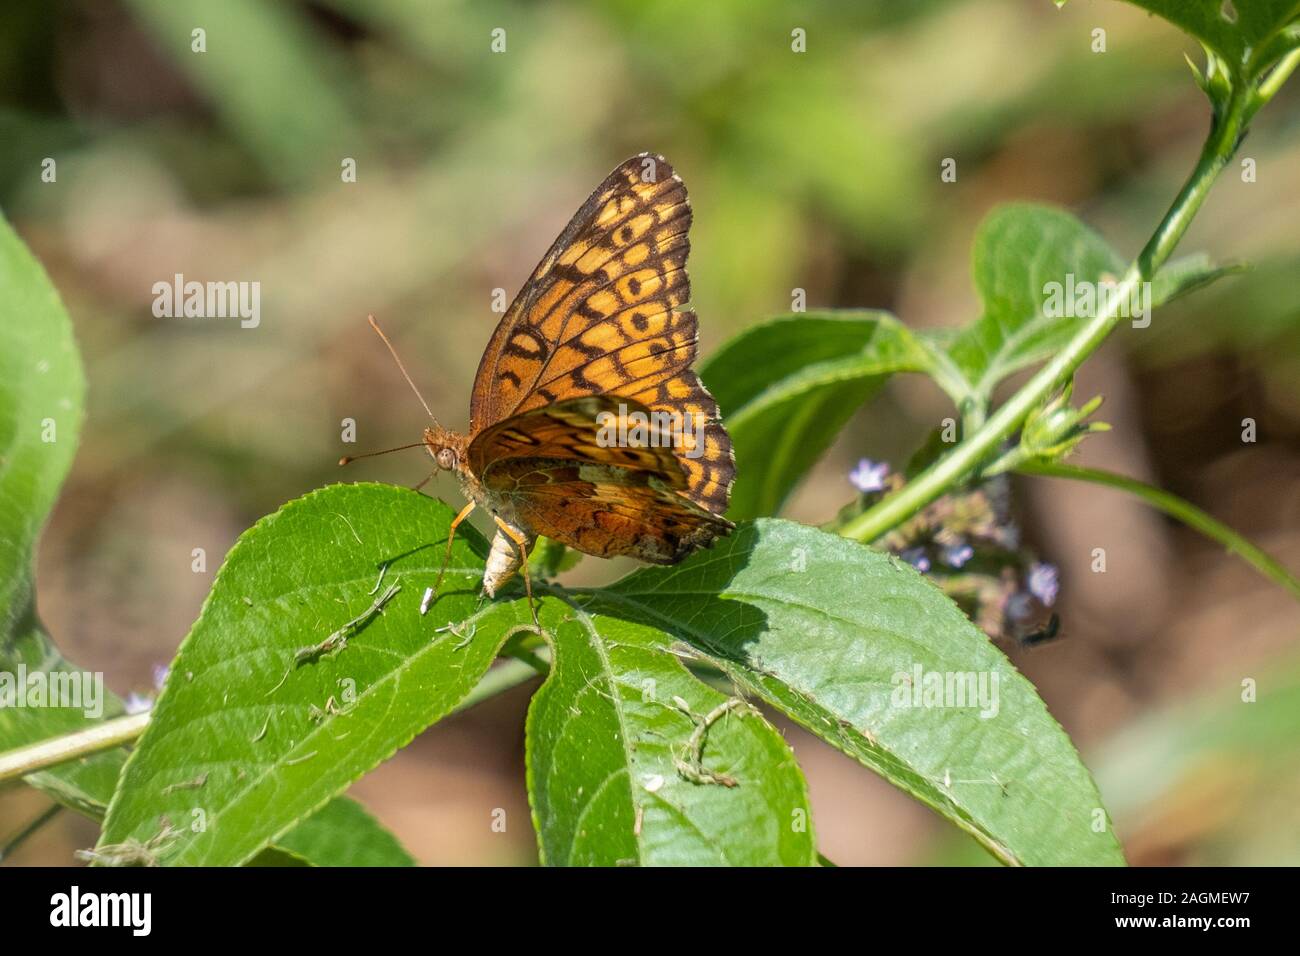 A female variegated butterfly lays eggs on a leaf, ensuring the continuation of her species at Yates Mill County Park in Raleigh, North Carolina. Stock Photo